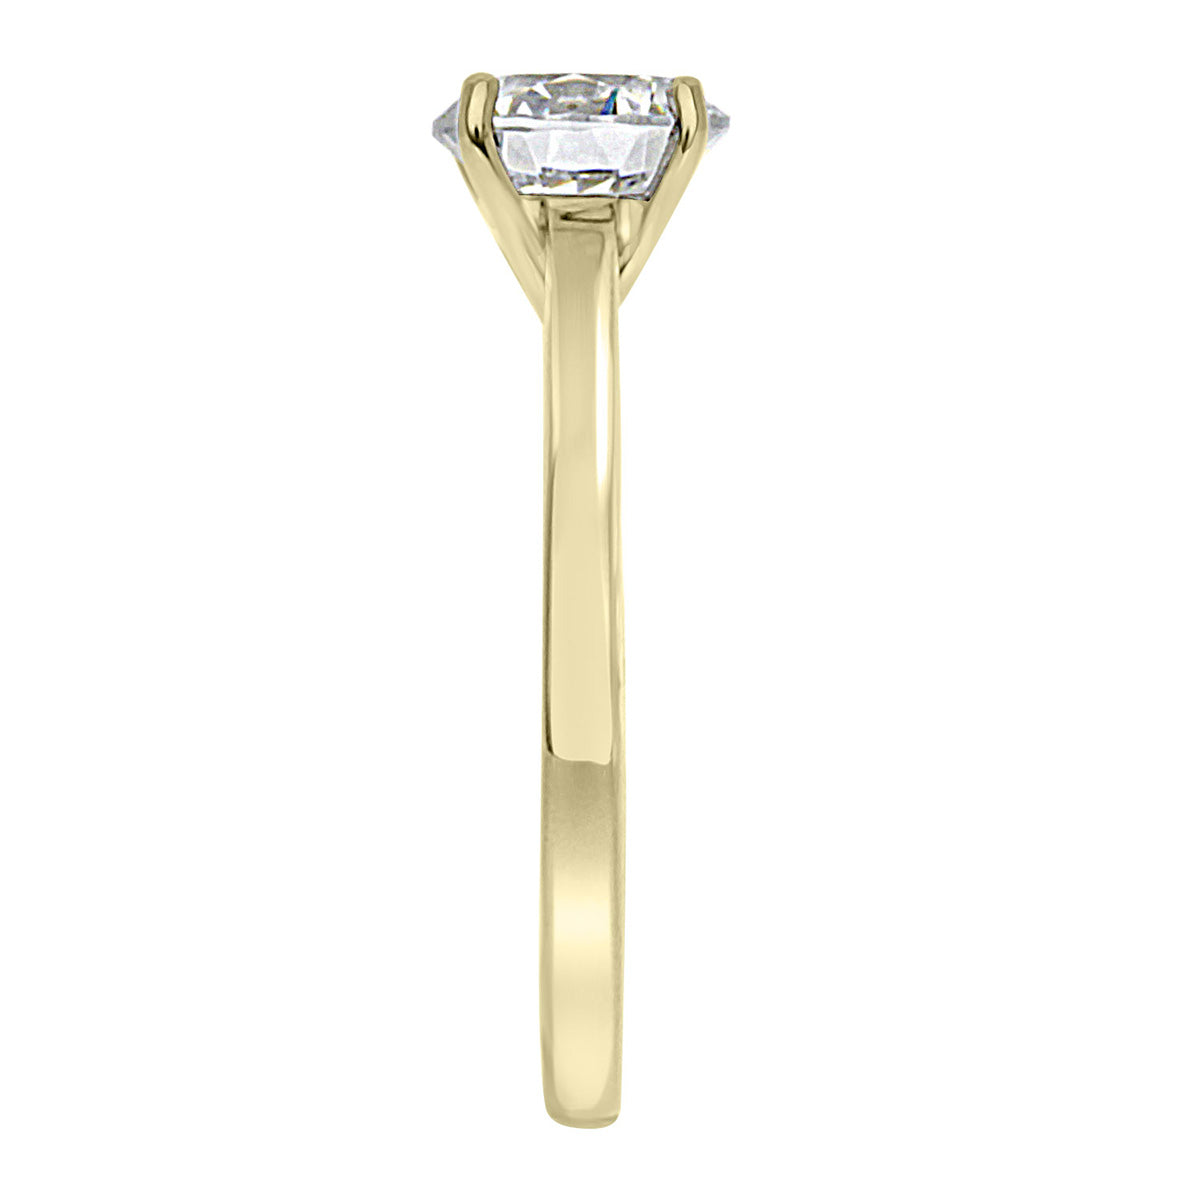 Solitaire Engagement Ring in yellow gold pictured standing upright from a side view